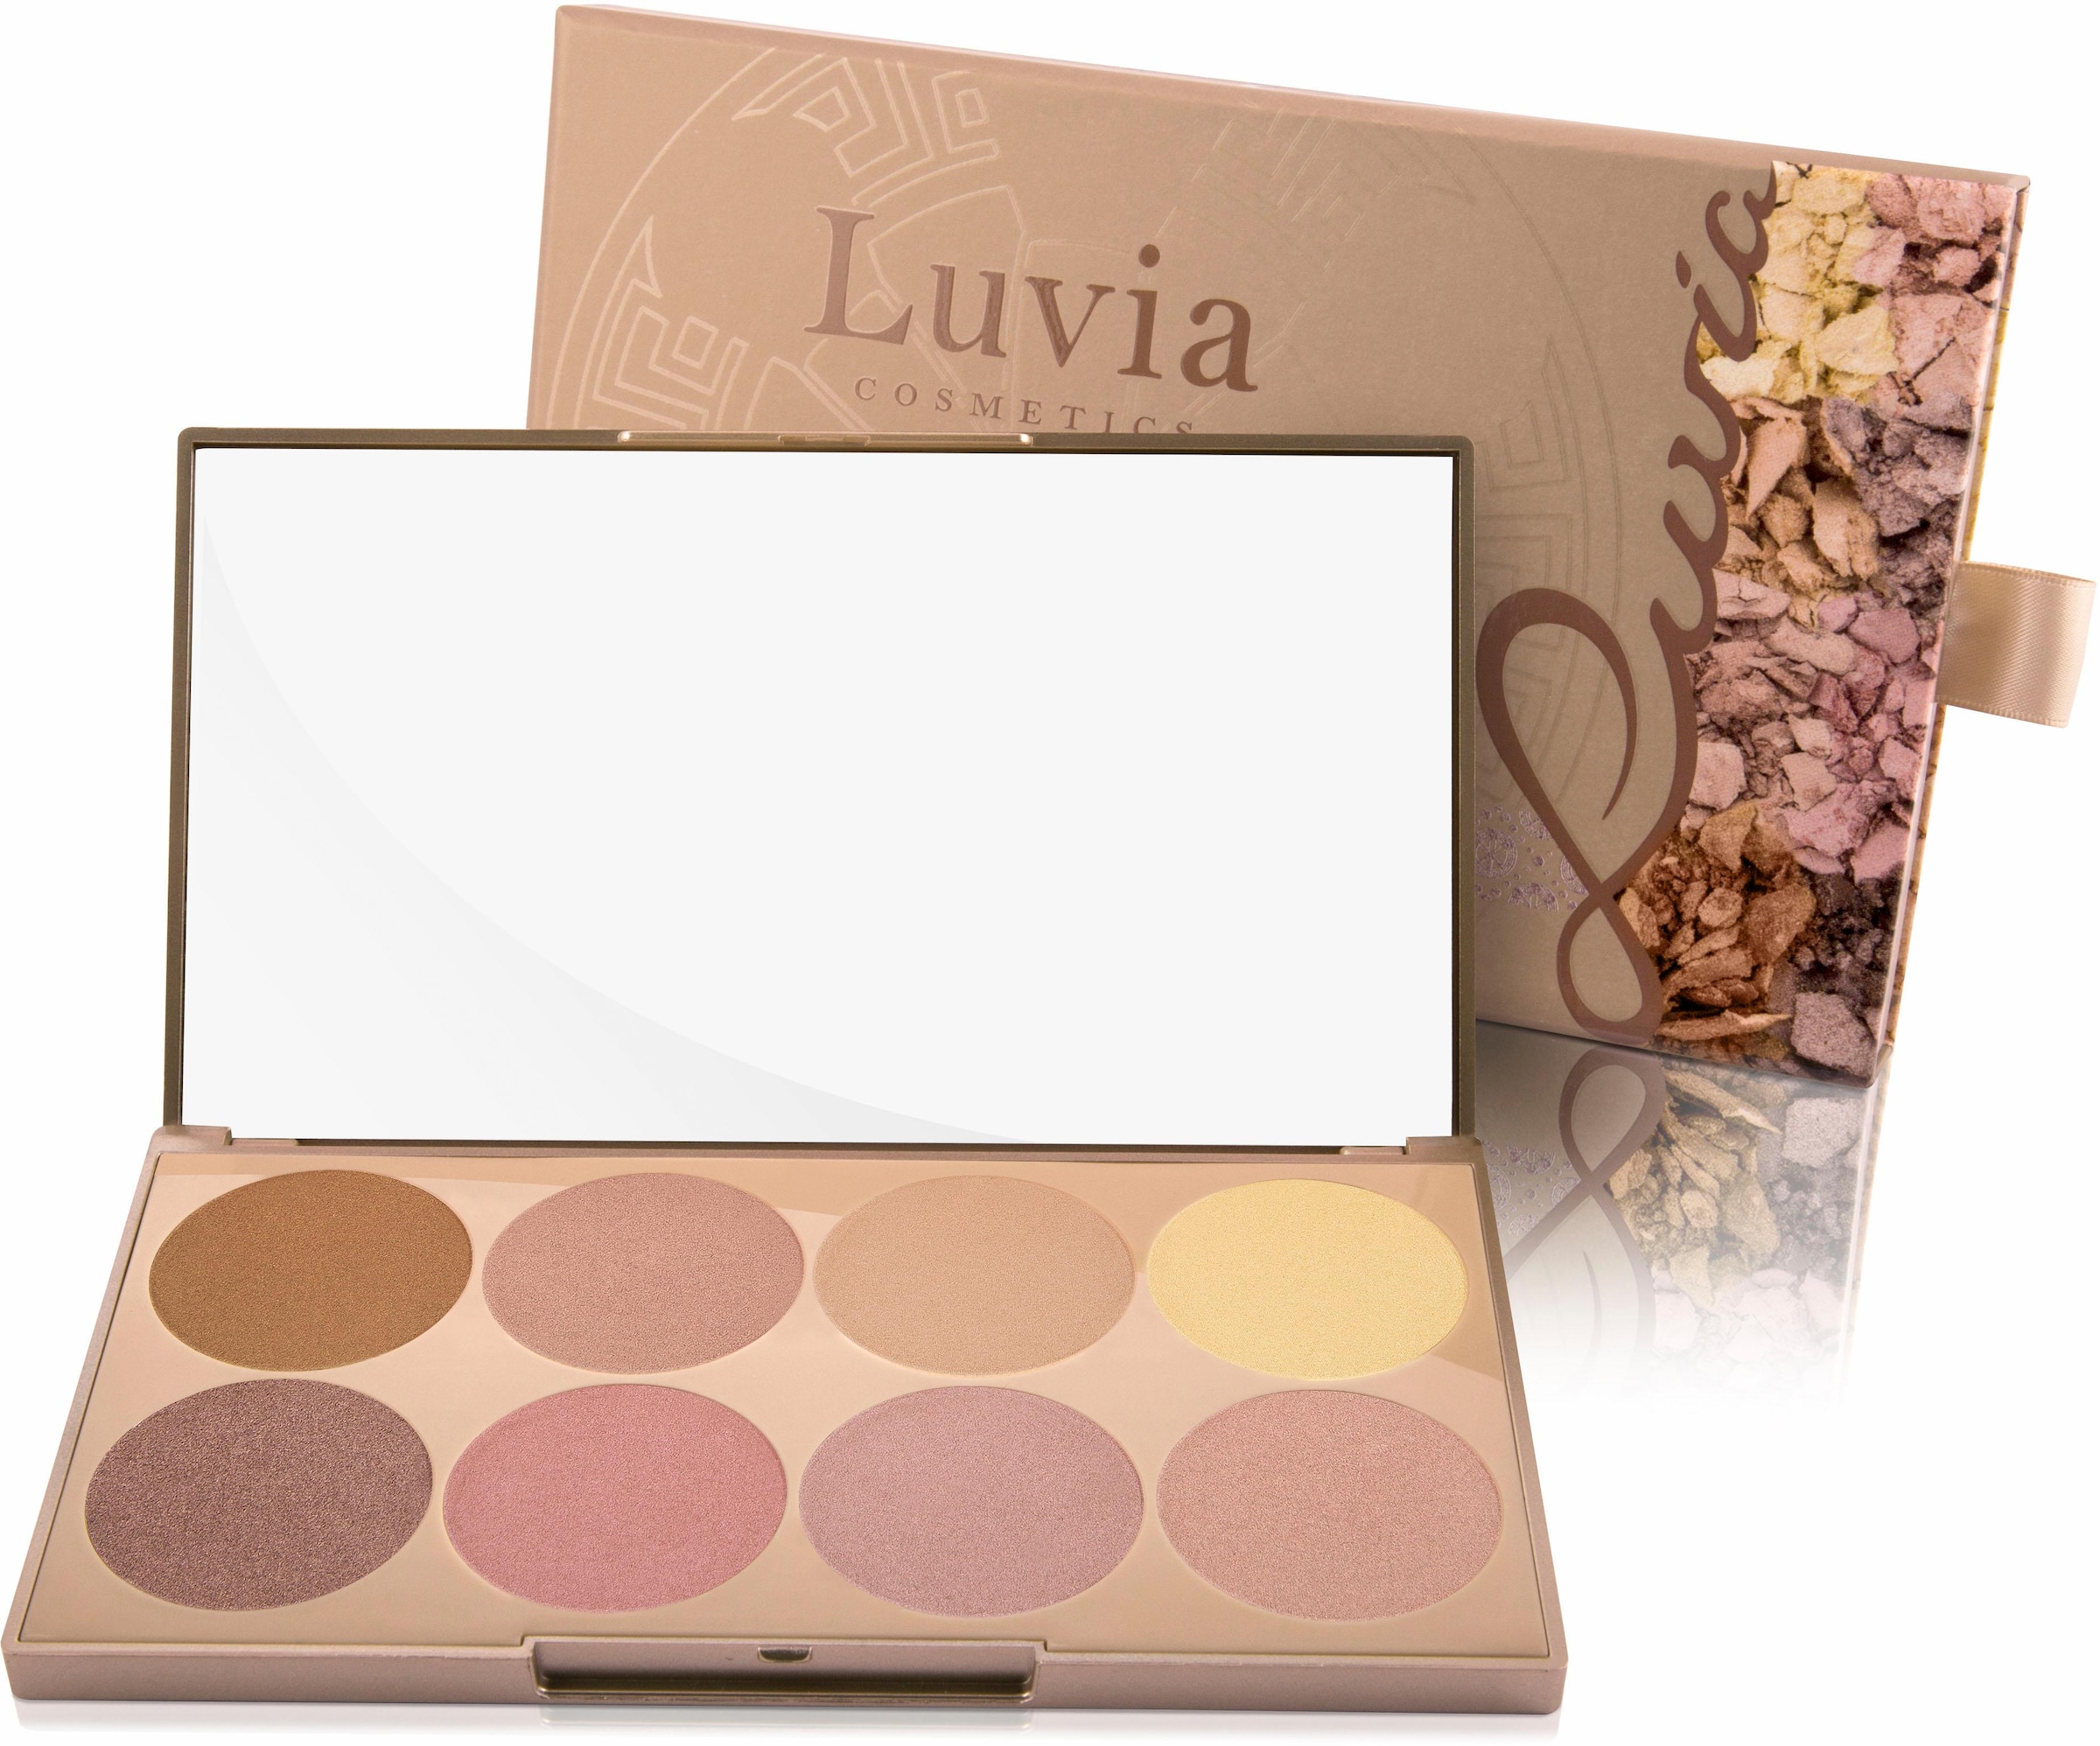 Luvia Cosmetics Highlighter-Palette tlg.) Shades »Prime Farben Glow 8 (8 Vol. 1« Essential Contouring